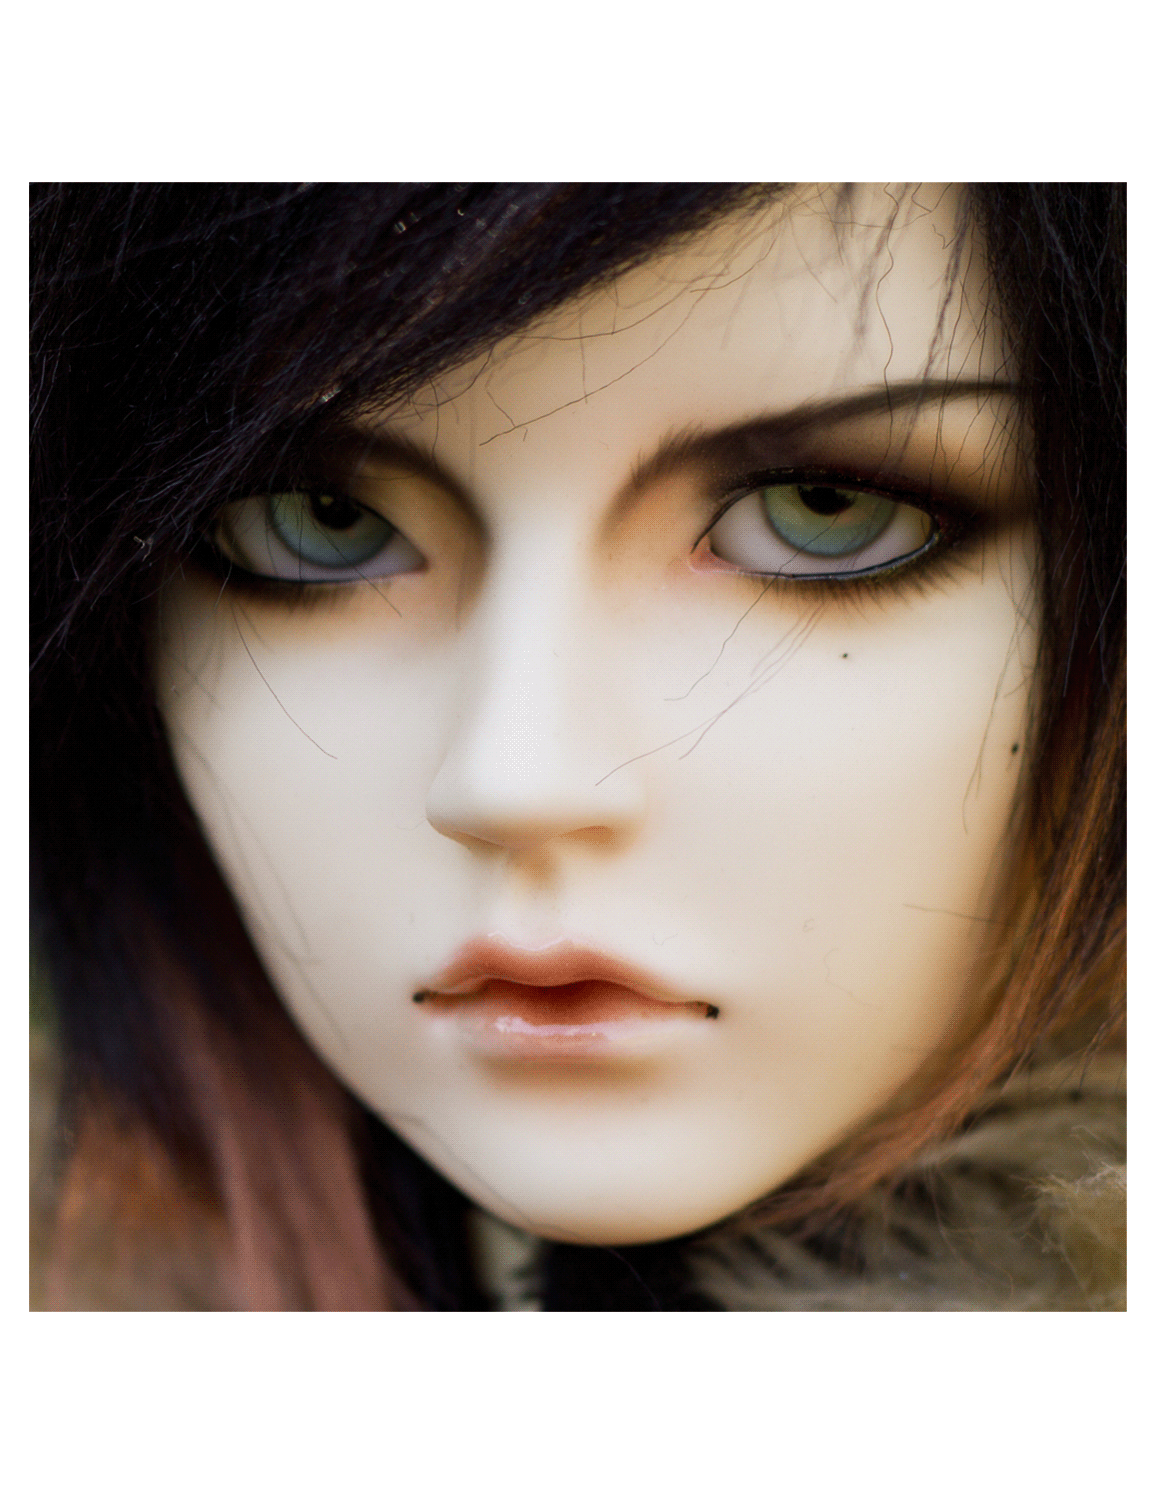 bjd ABJD doll Asian doll japan ball jointed doll faceup repaint restoration